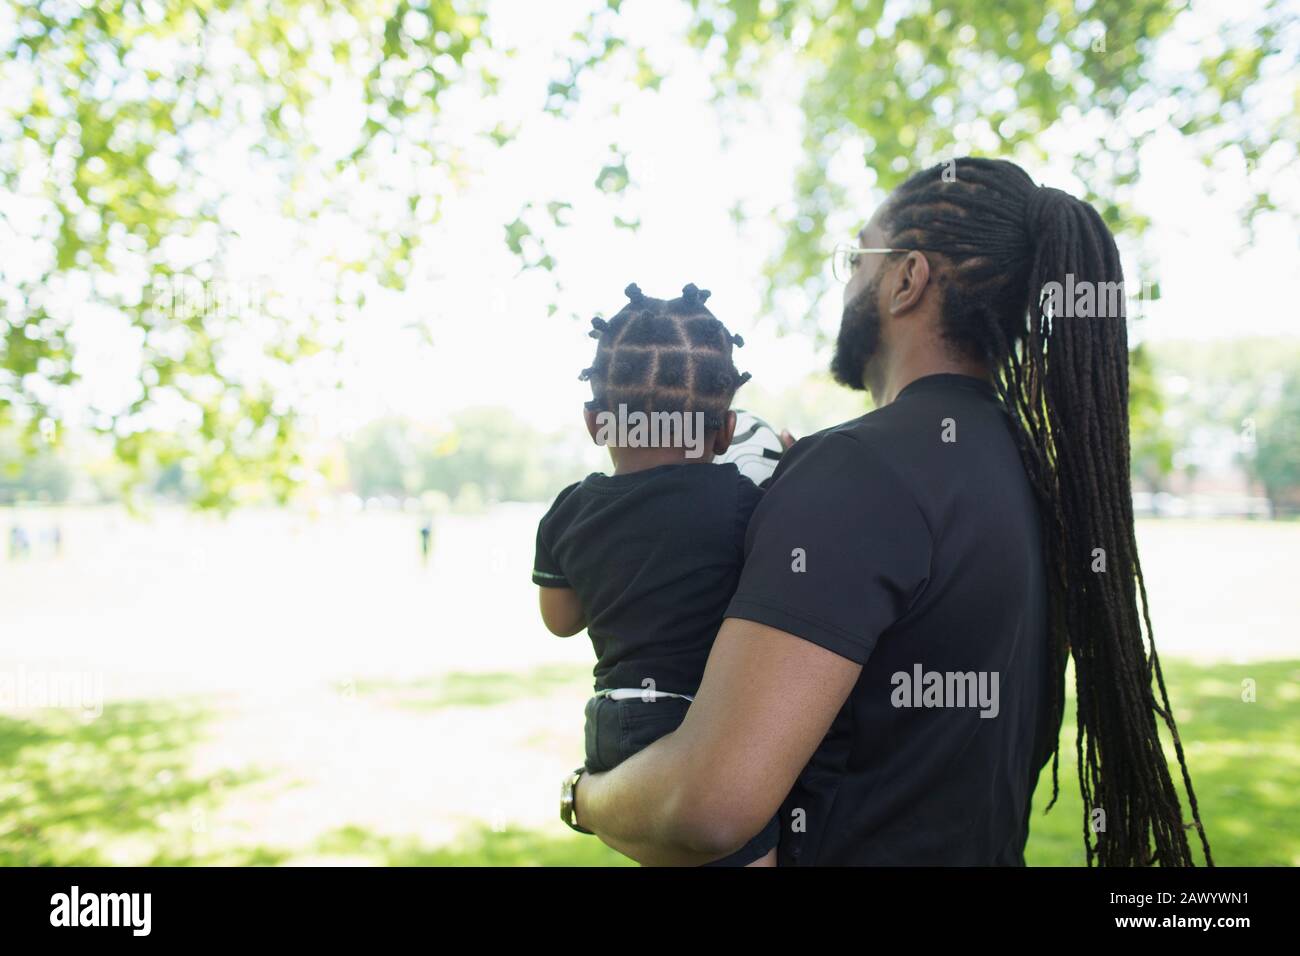 Father with long braids carrying son in park Stock Photo